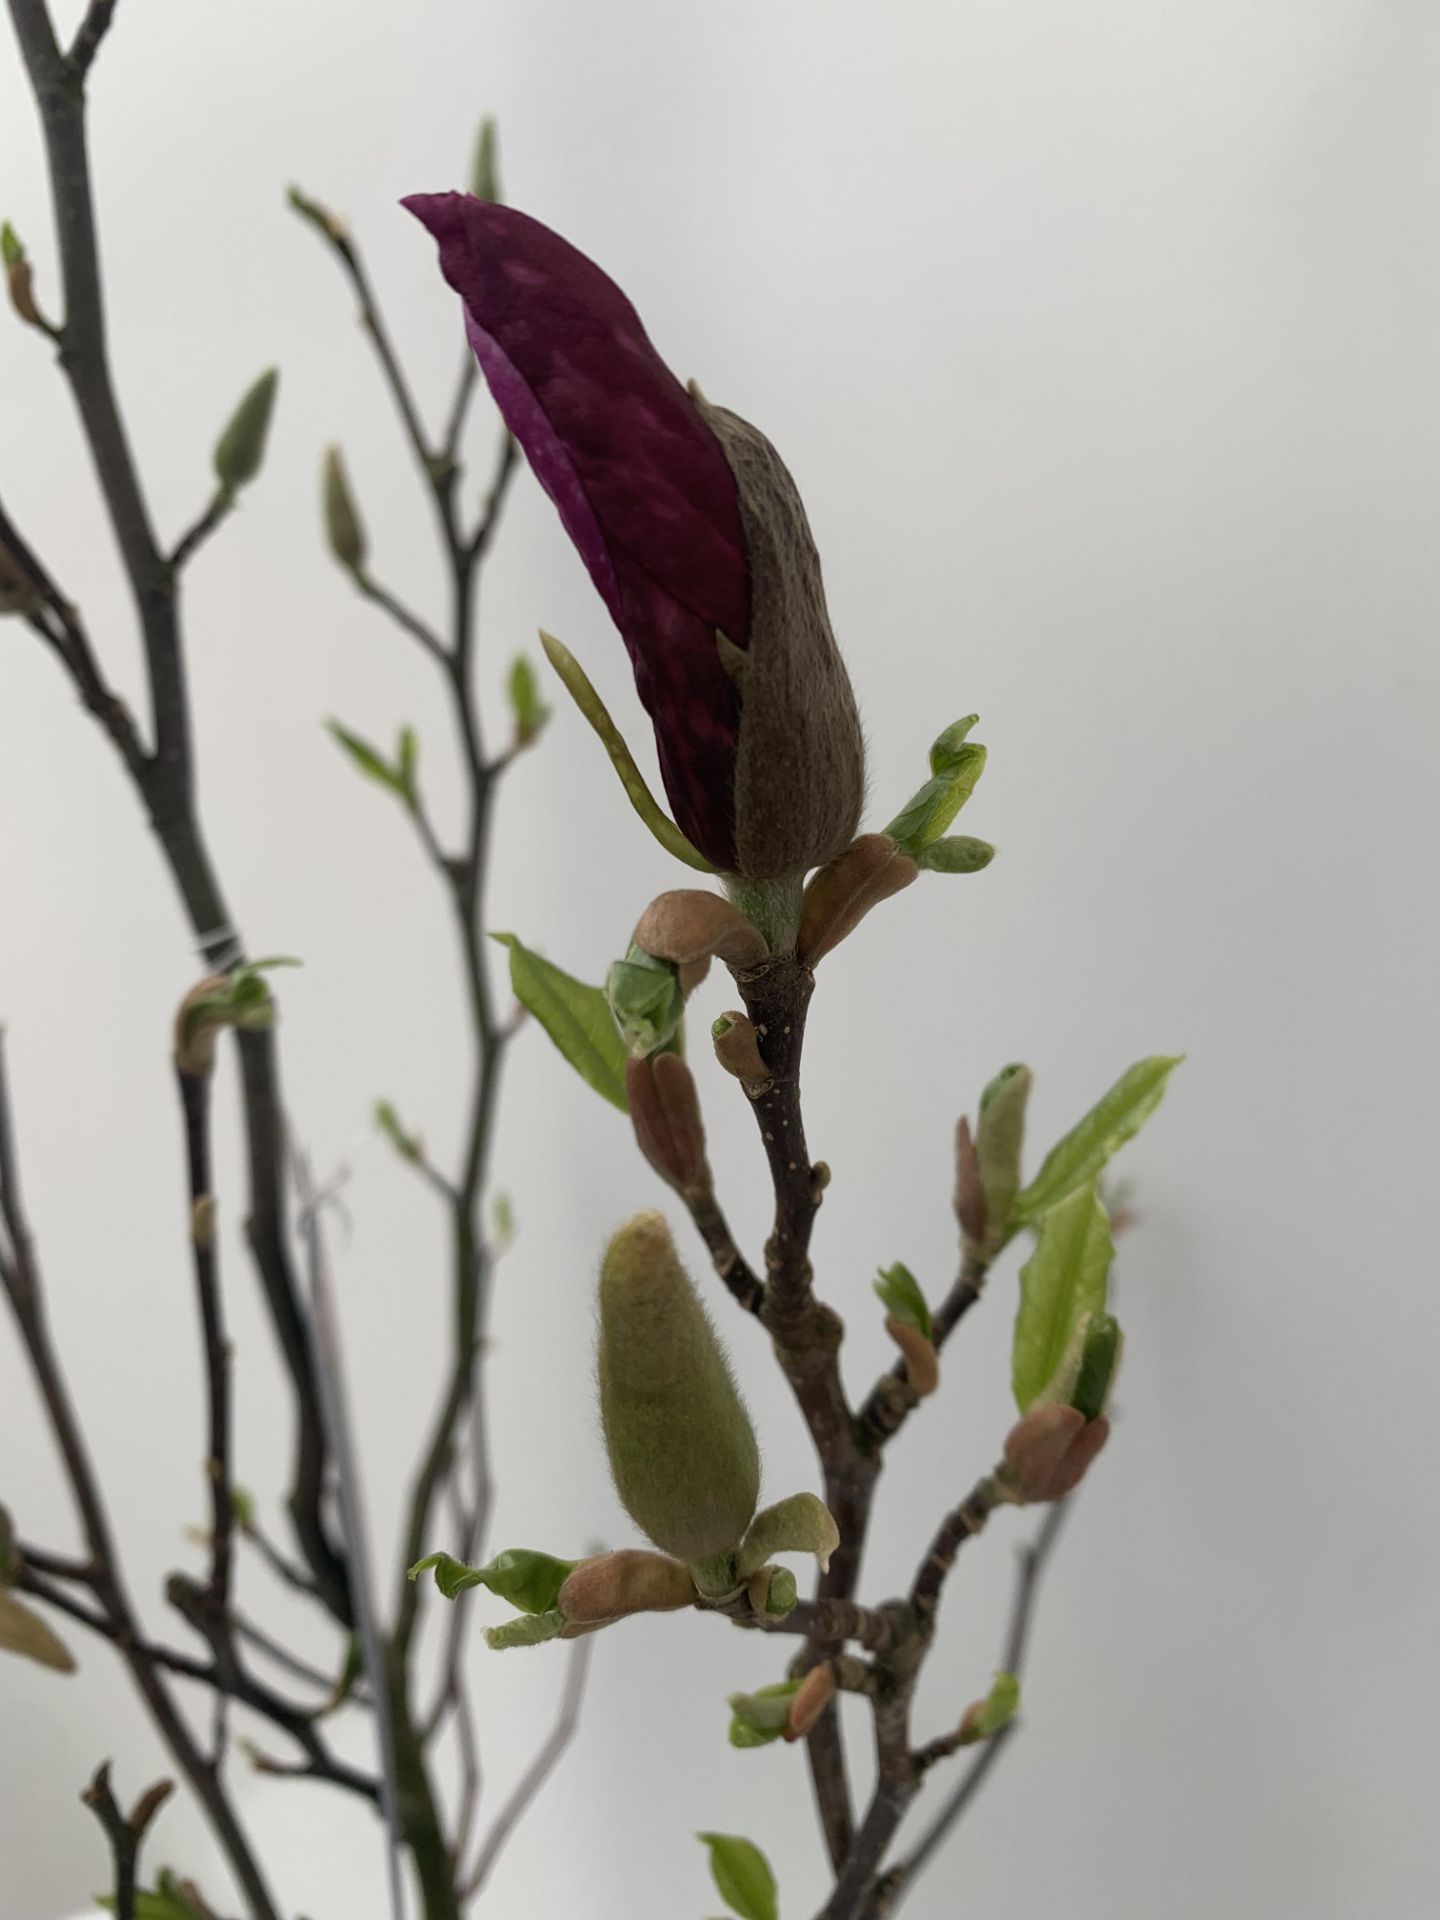 ONE MAGNOLIA PINK 'JANE' APPROX 120CM IN HEIGHT IN 7 LTR POT PLUS VAT - Image 5 of 10